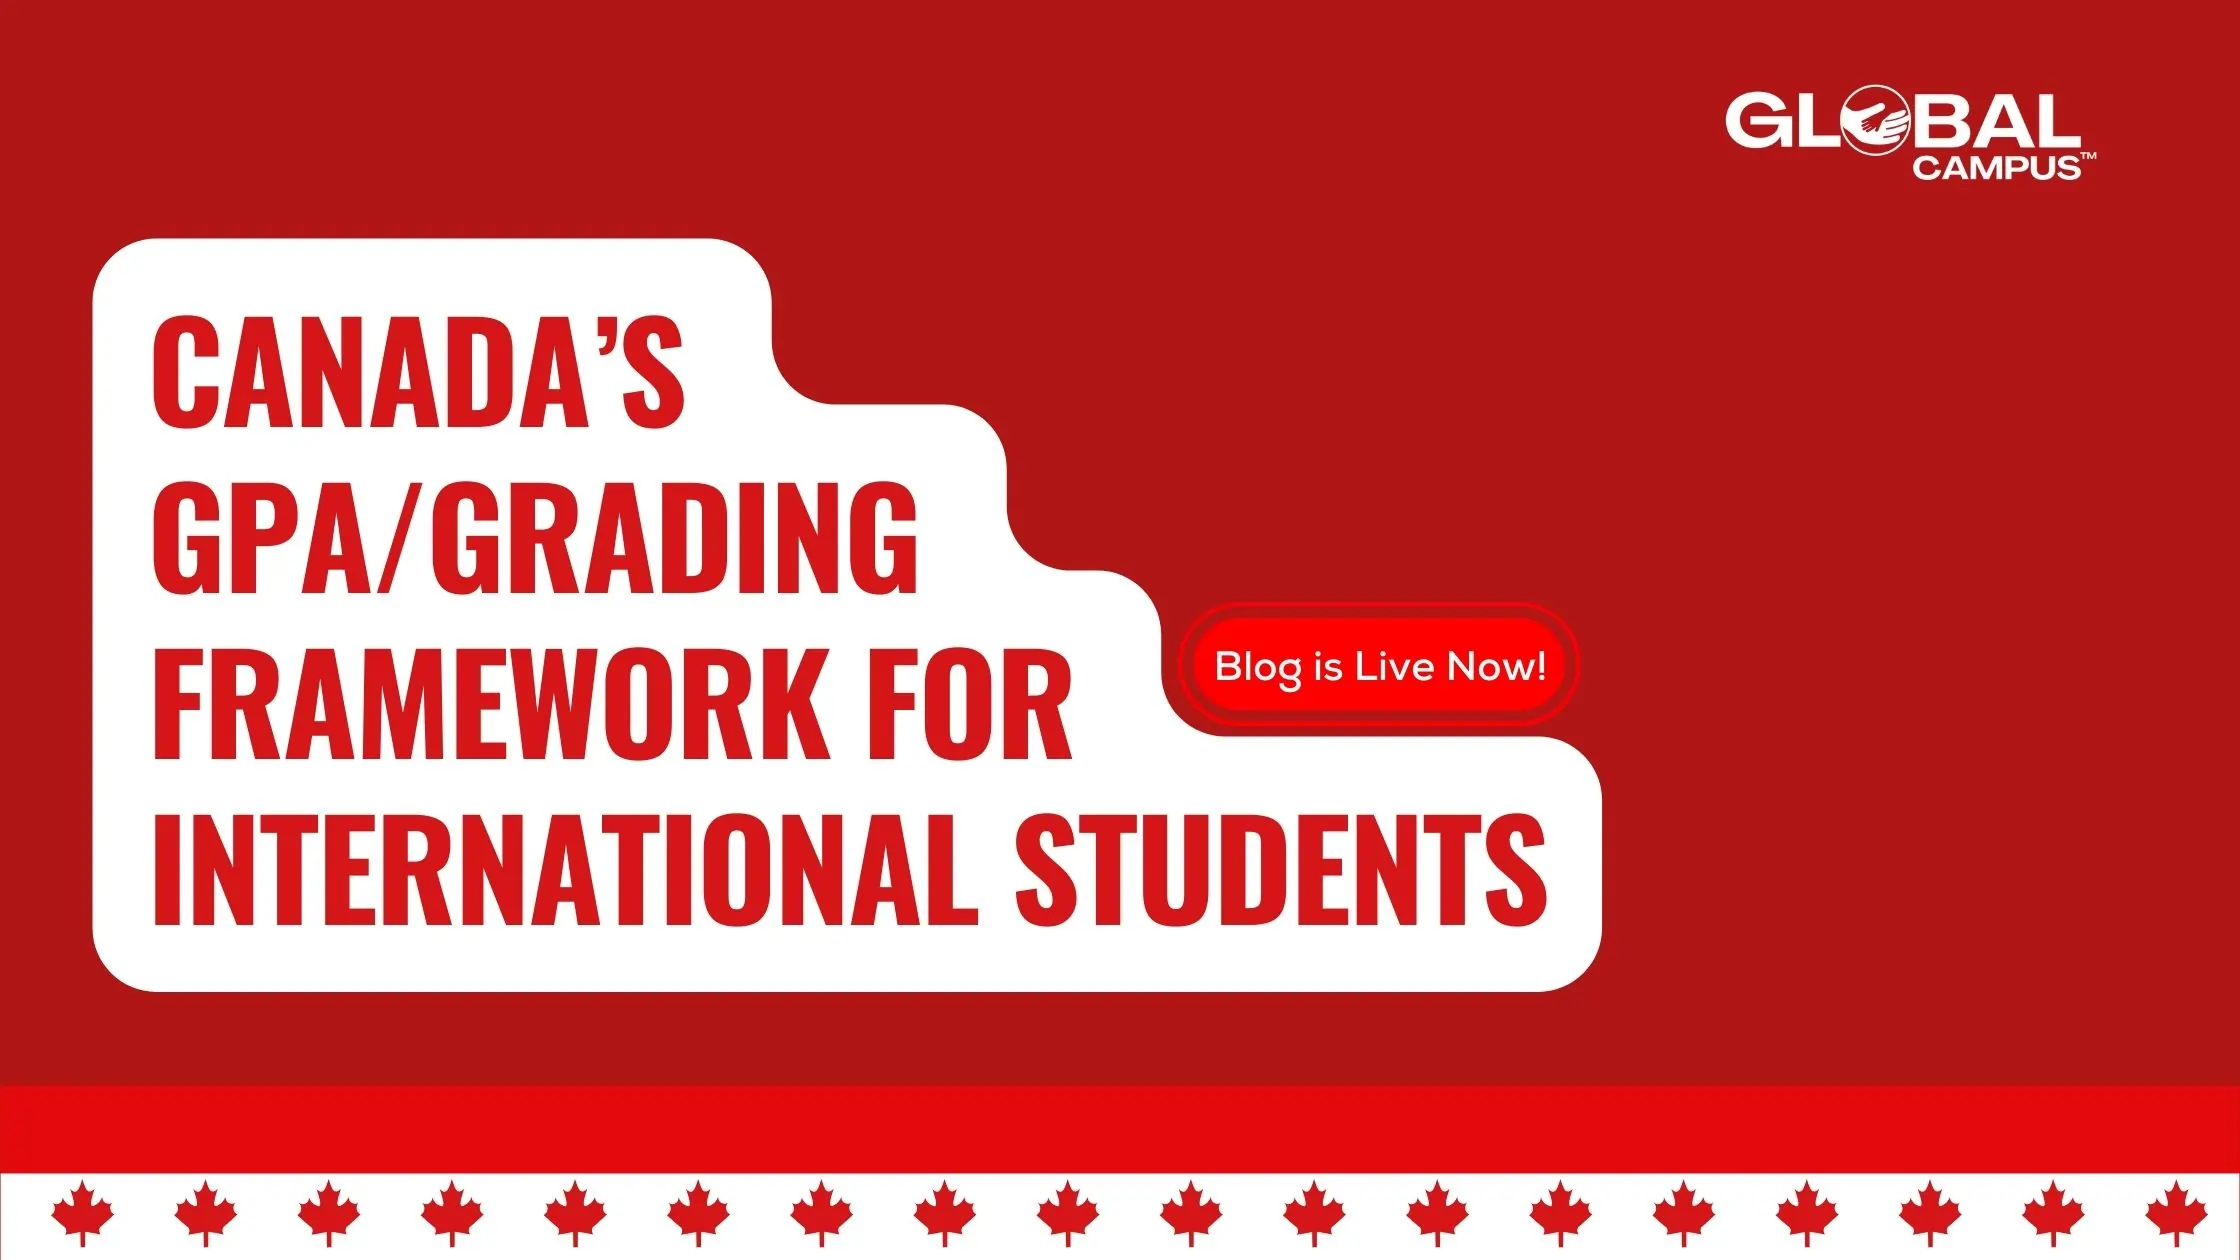 A red-colored banner mentions Canada's GPA Grading System for International Students.